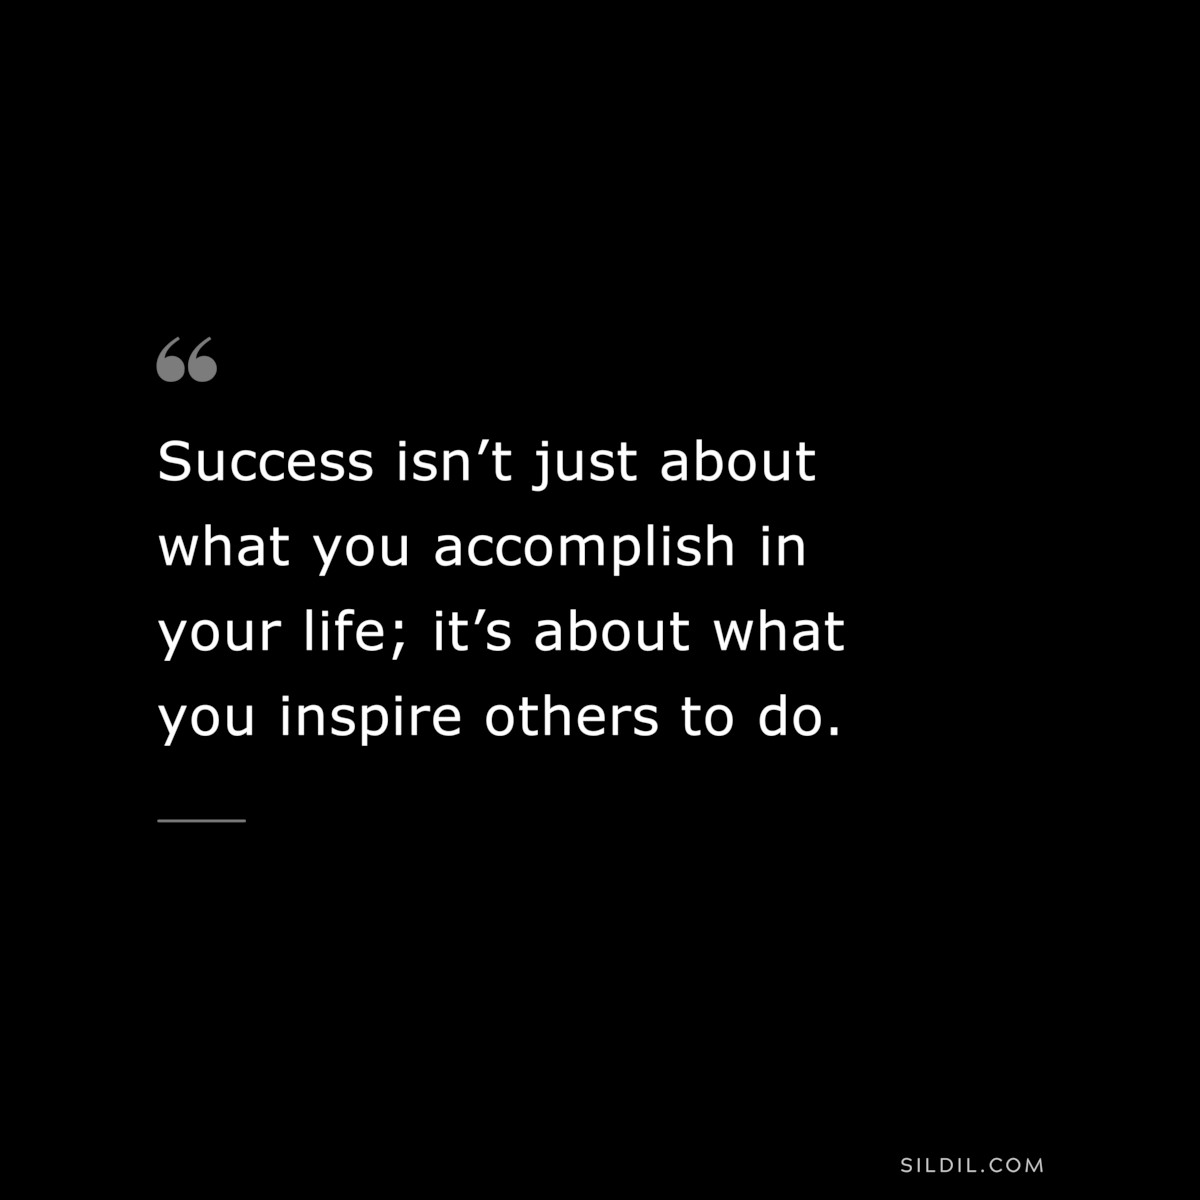 Success isn’t just about what you accomplish in your life; it’s about what you inspire others to do.